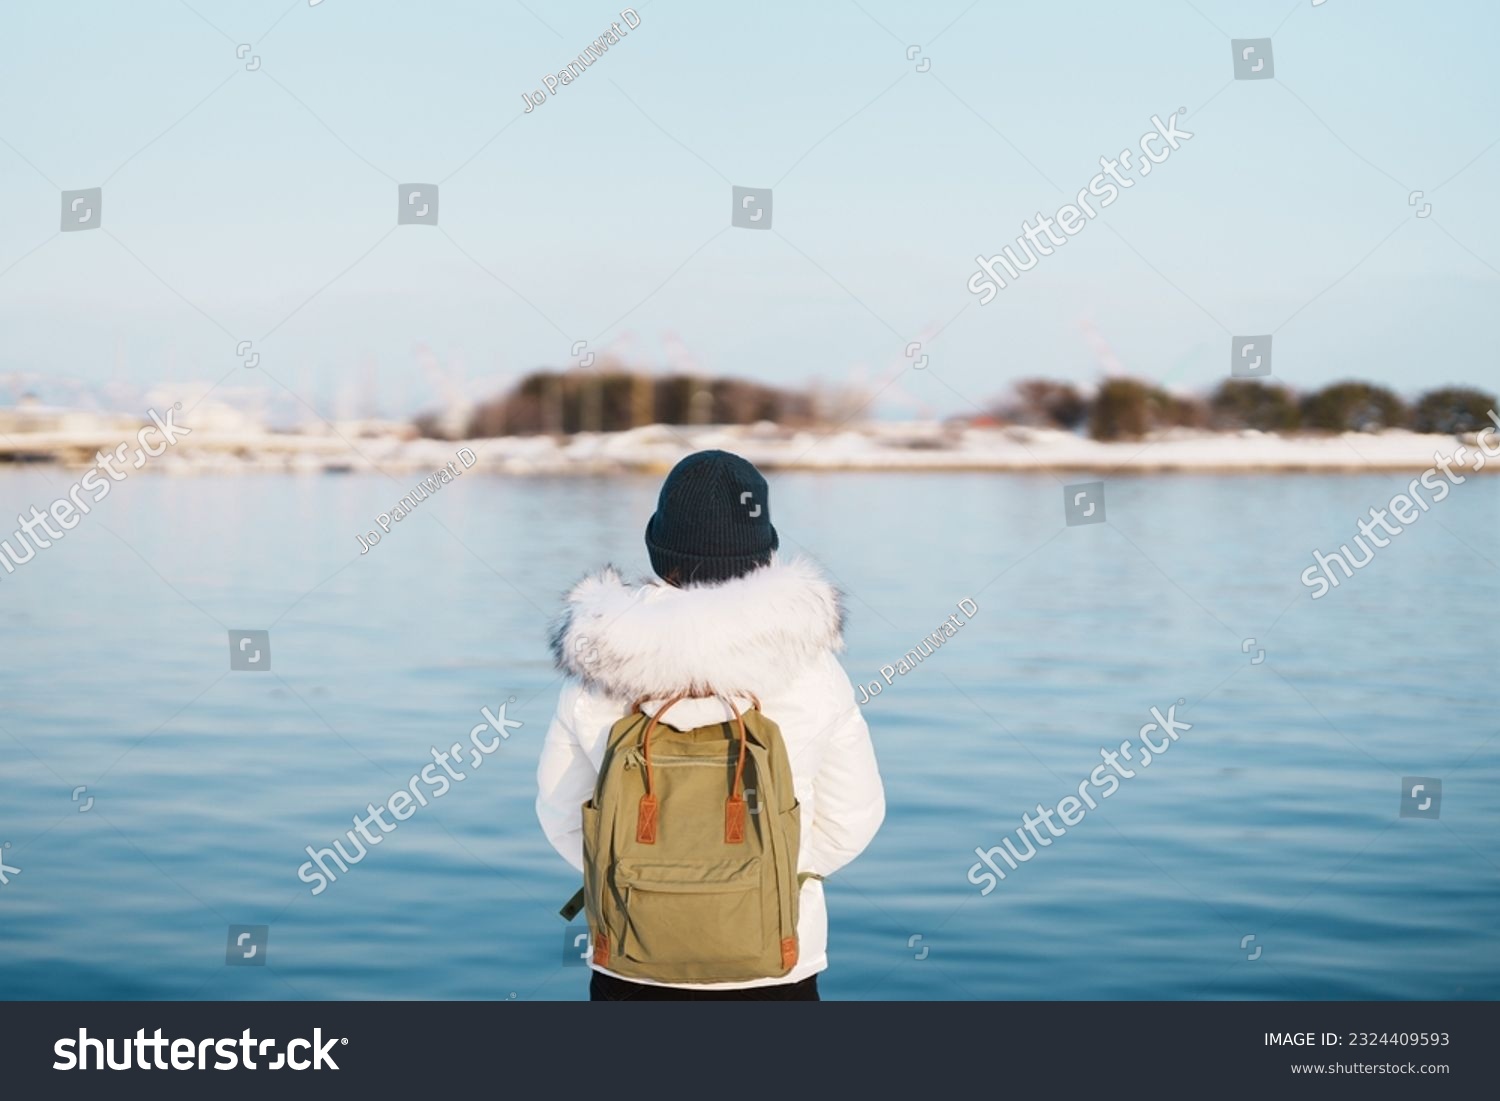 Woman tourist Visiting in Hakodate, Traveler in Sweater sightseeing Hakodate port near Red Brick Warehouse with Snow in winter. Hokkaido, Japan.Travel and Vacation concept #2324409593